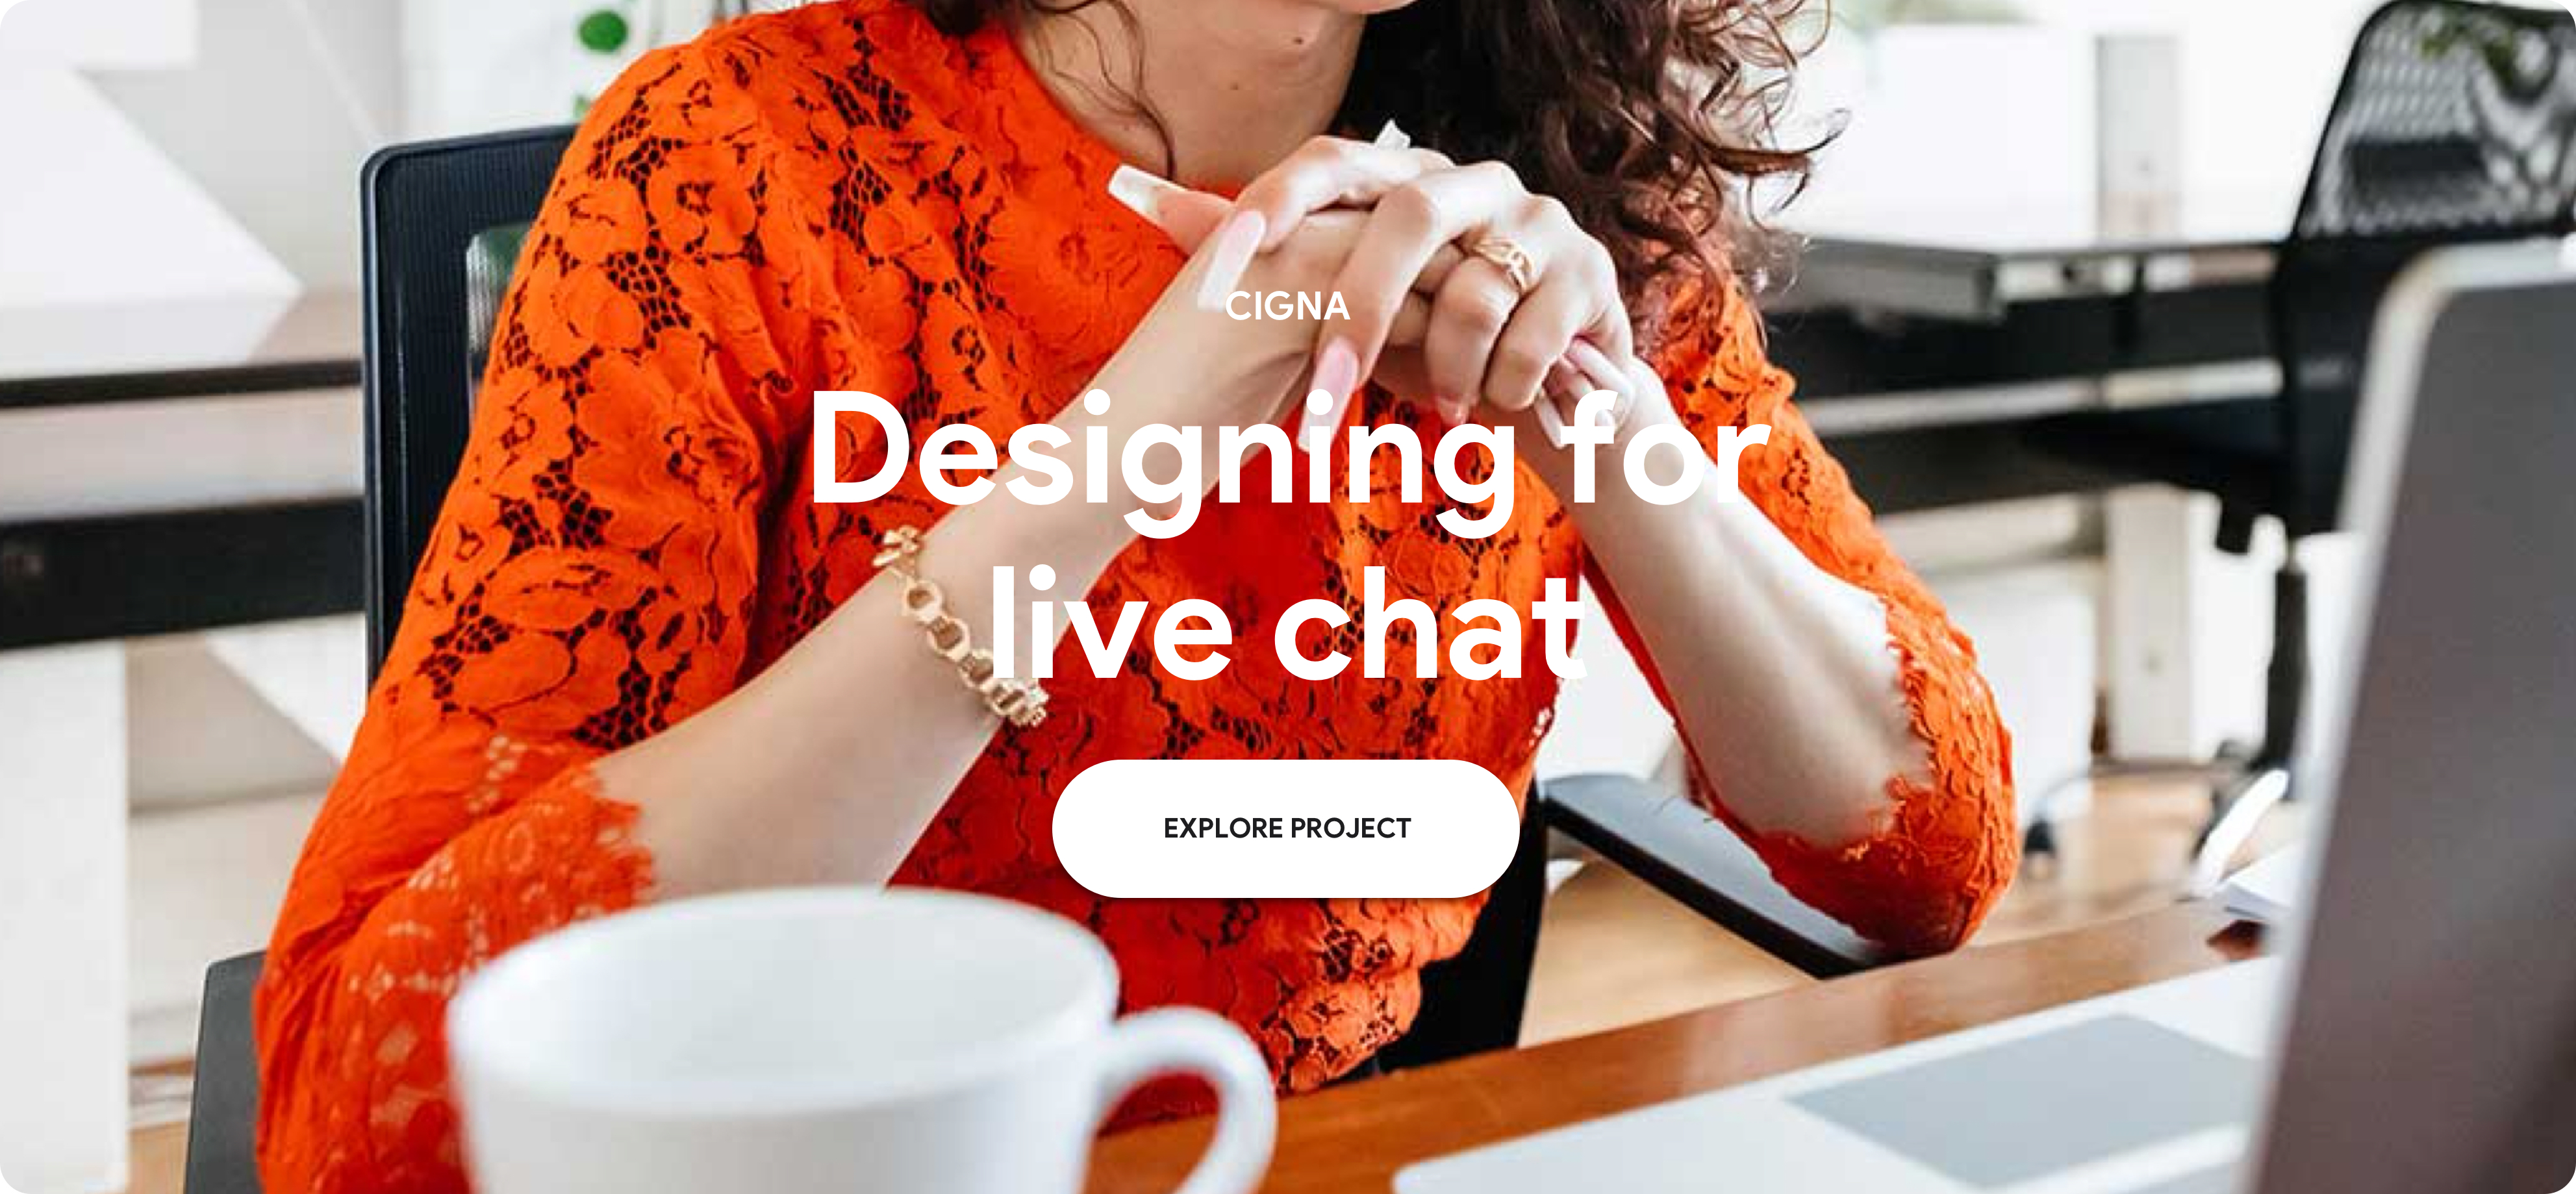 Designing for live chat